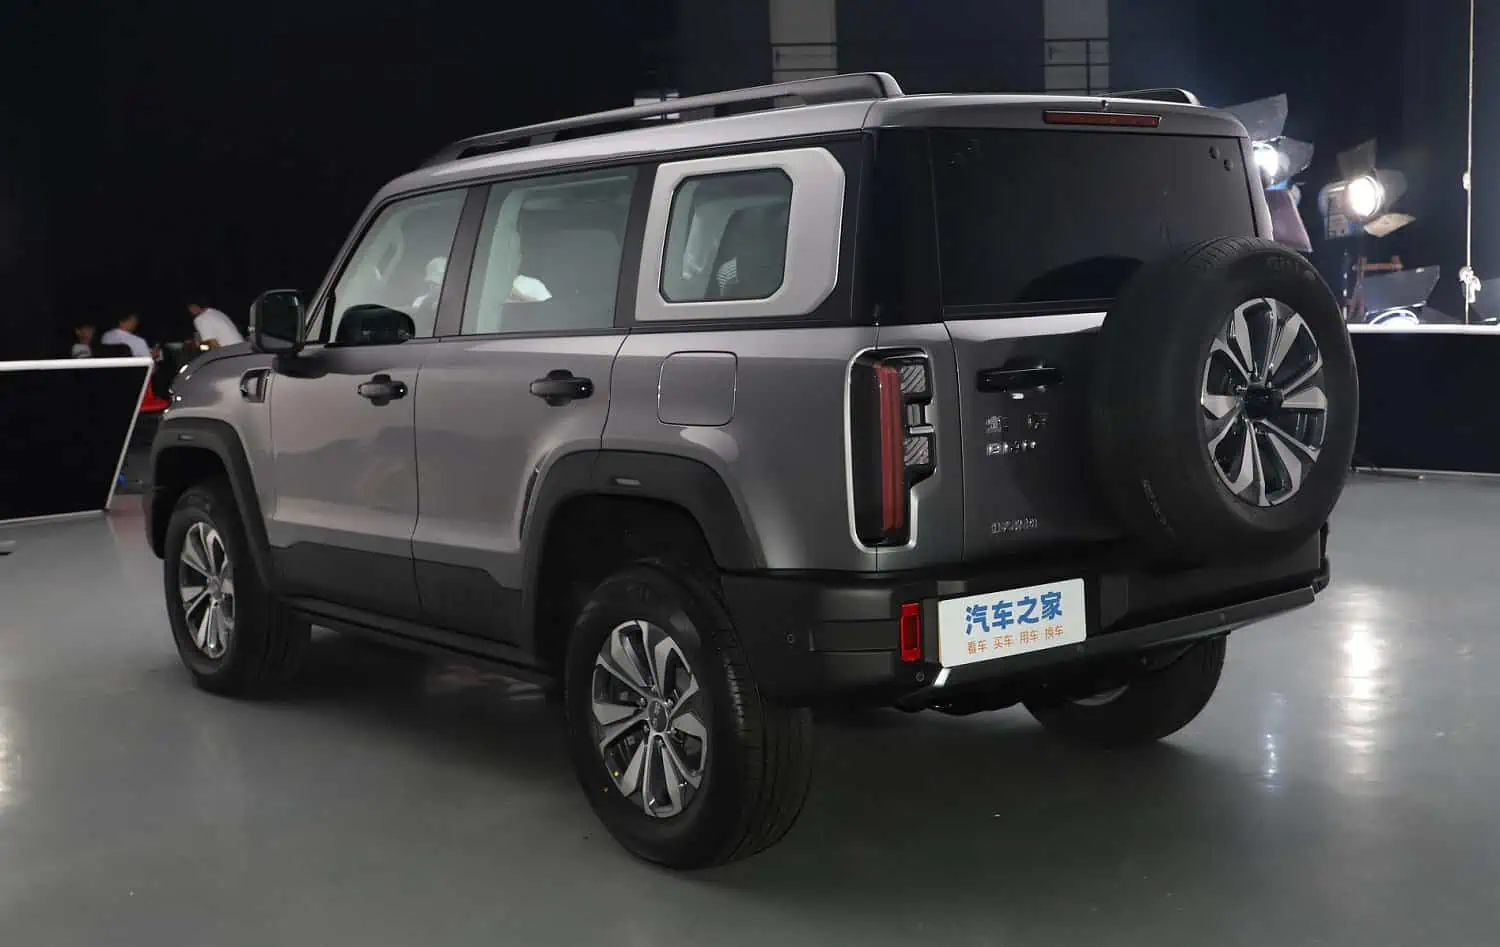 First images of new BAIC BJ40 surface